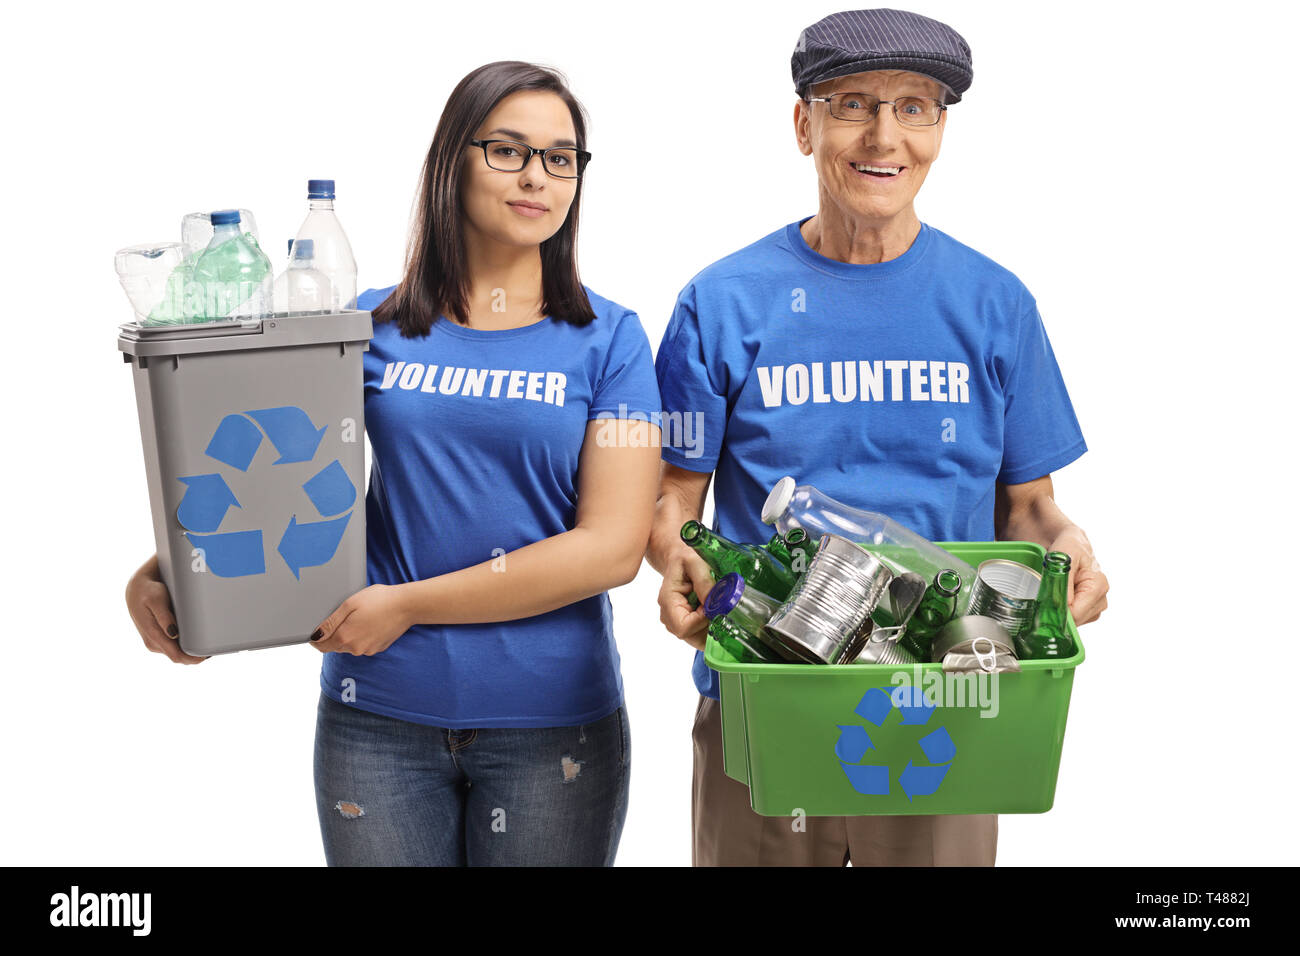 Young female volunteer and a senior man volunteer with recycling bins isolated on white background Stock Photo